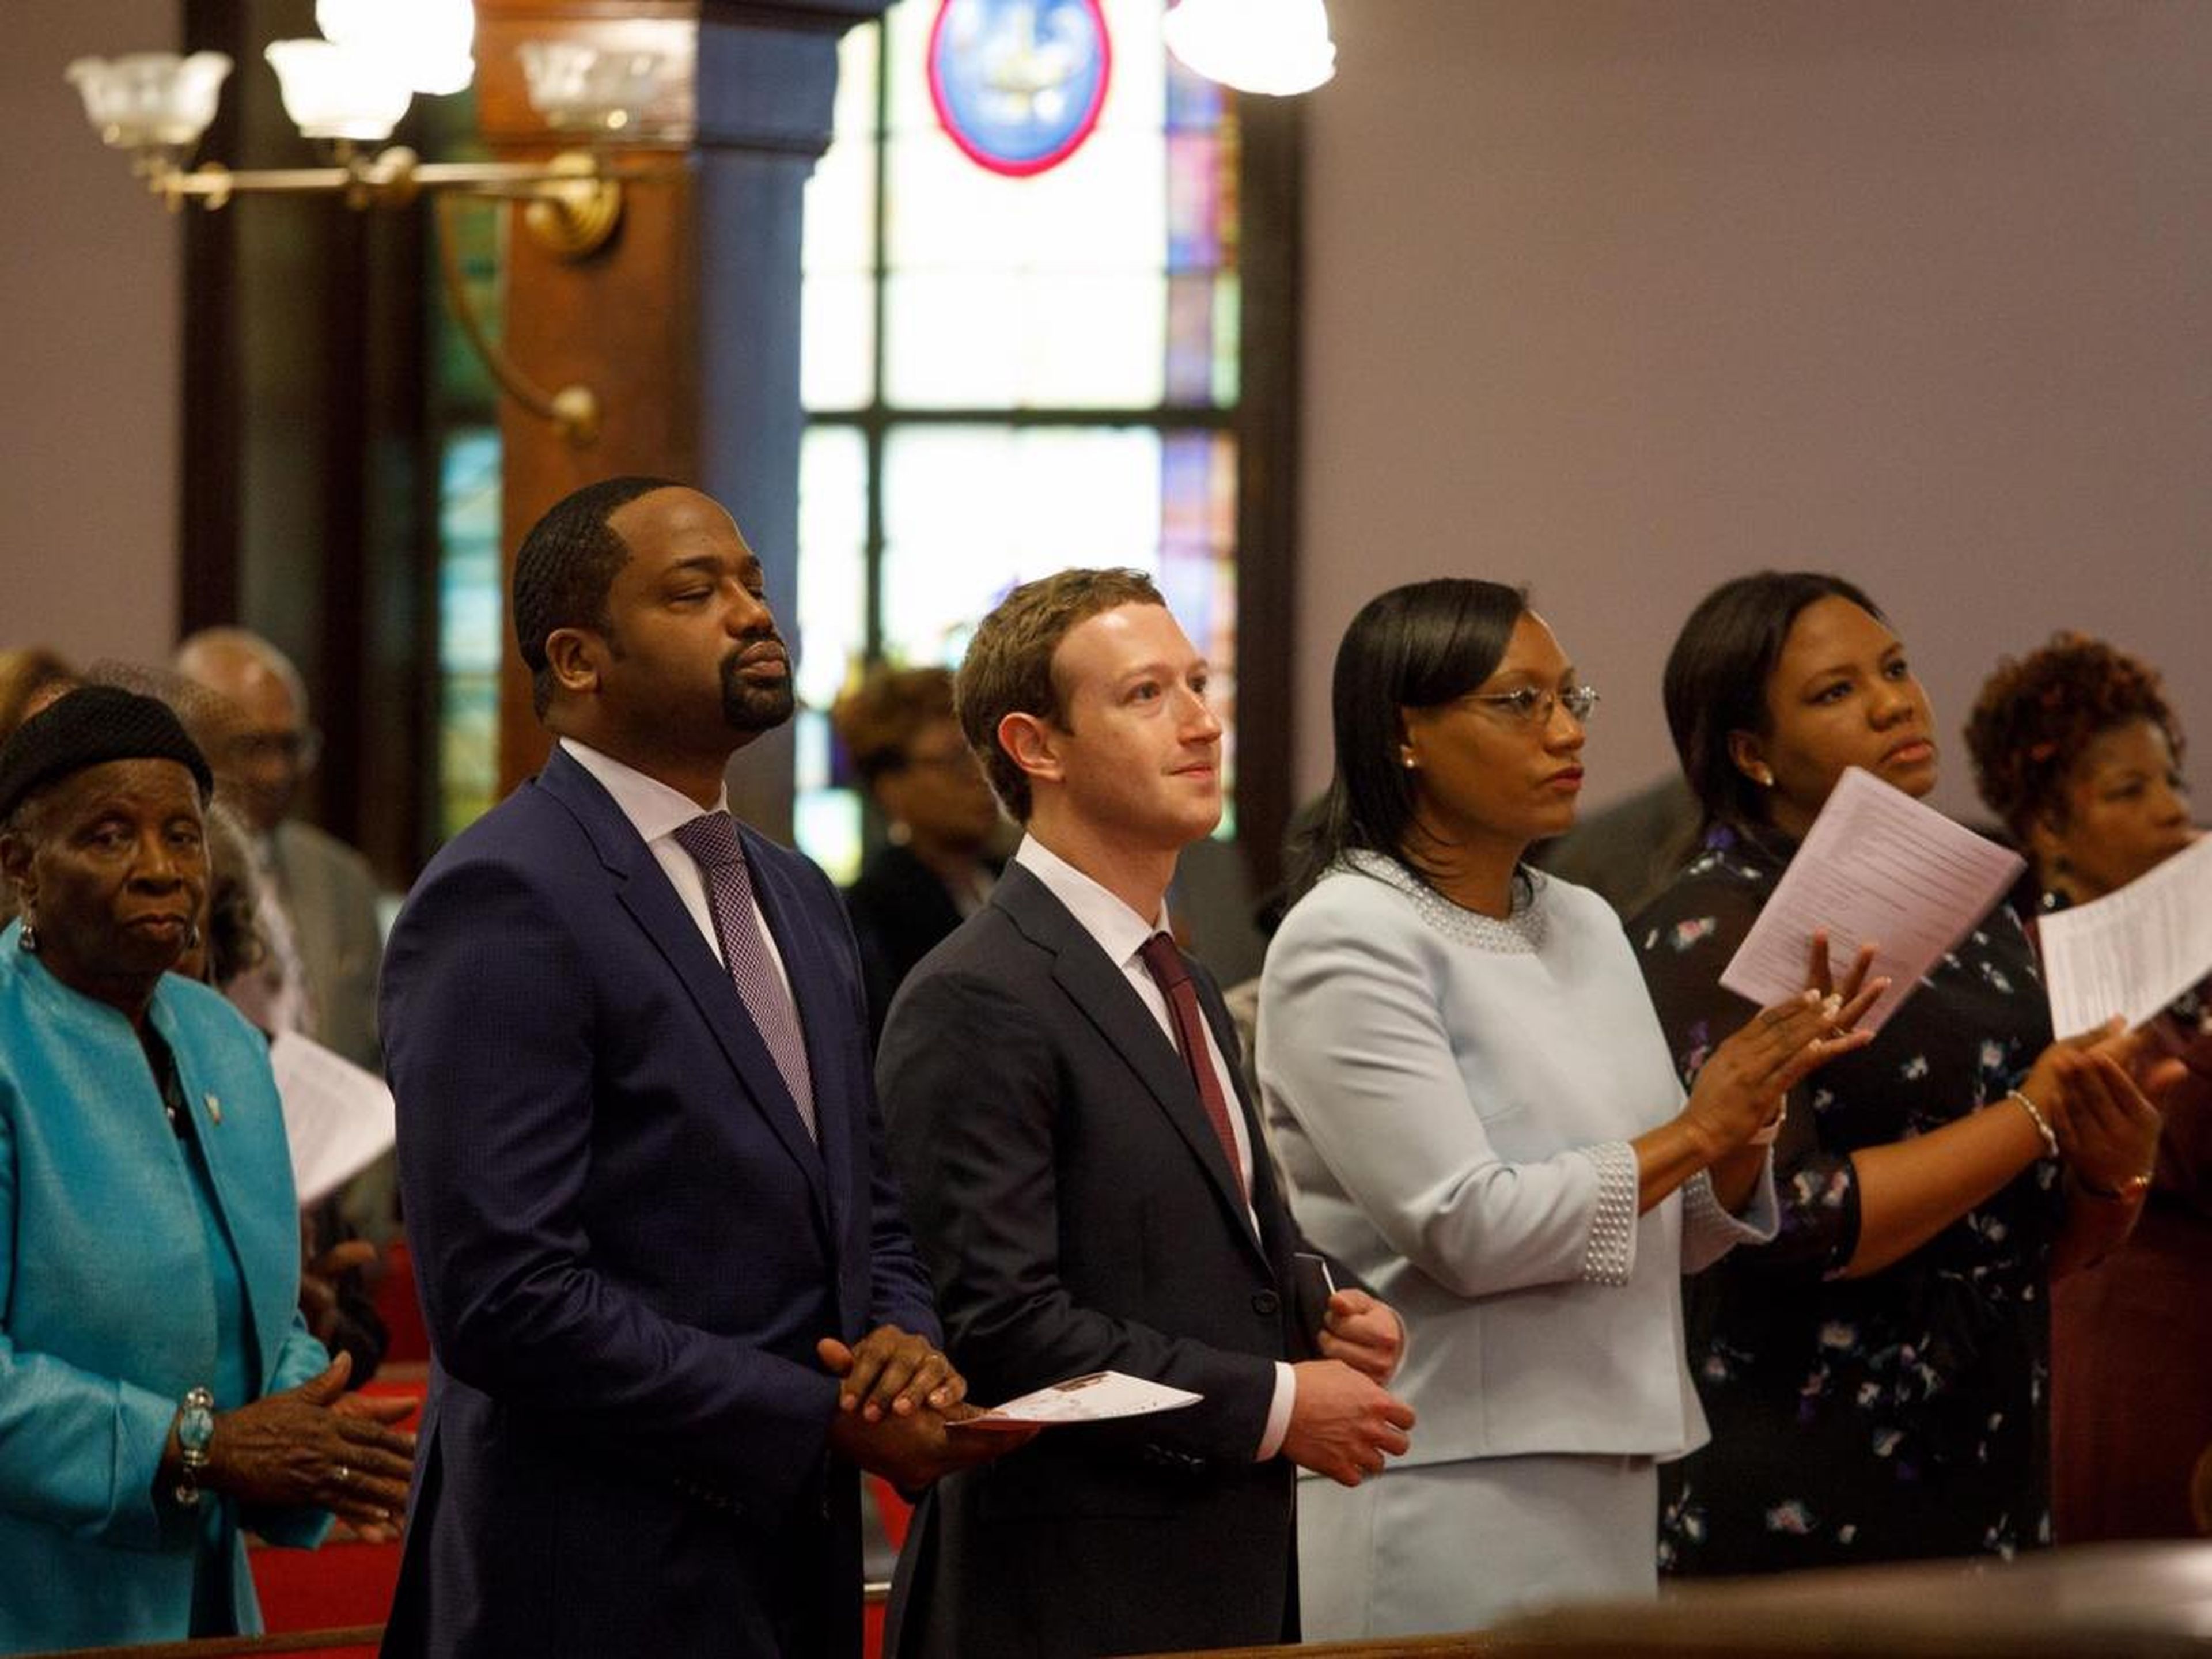 In 2017, Zuckerberg seemed to be flirting with a career in politics as he embarked on a whirlwind tour of the US. He was photographed working on a Ford assembly line in Michigan, visiting a Civil War battlefield in Mississippi,